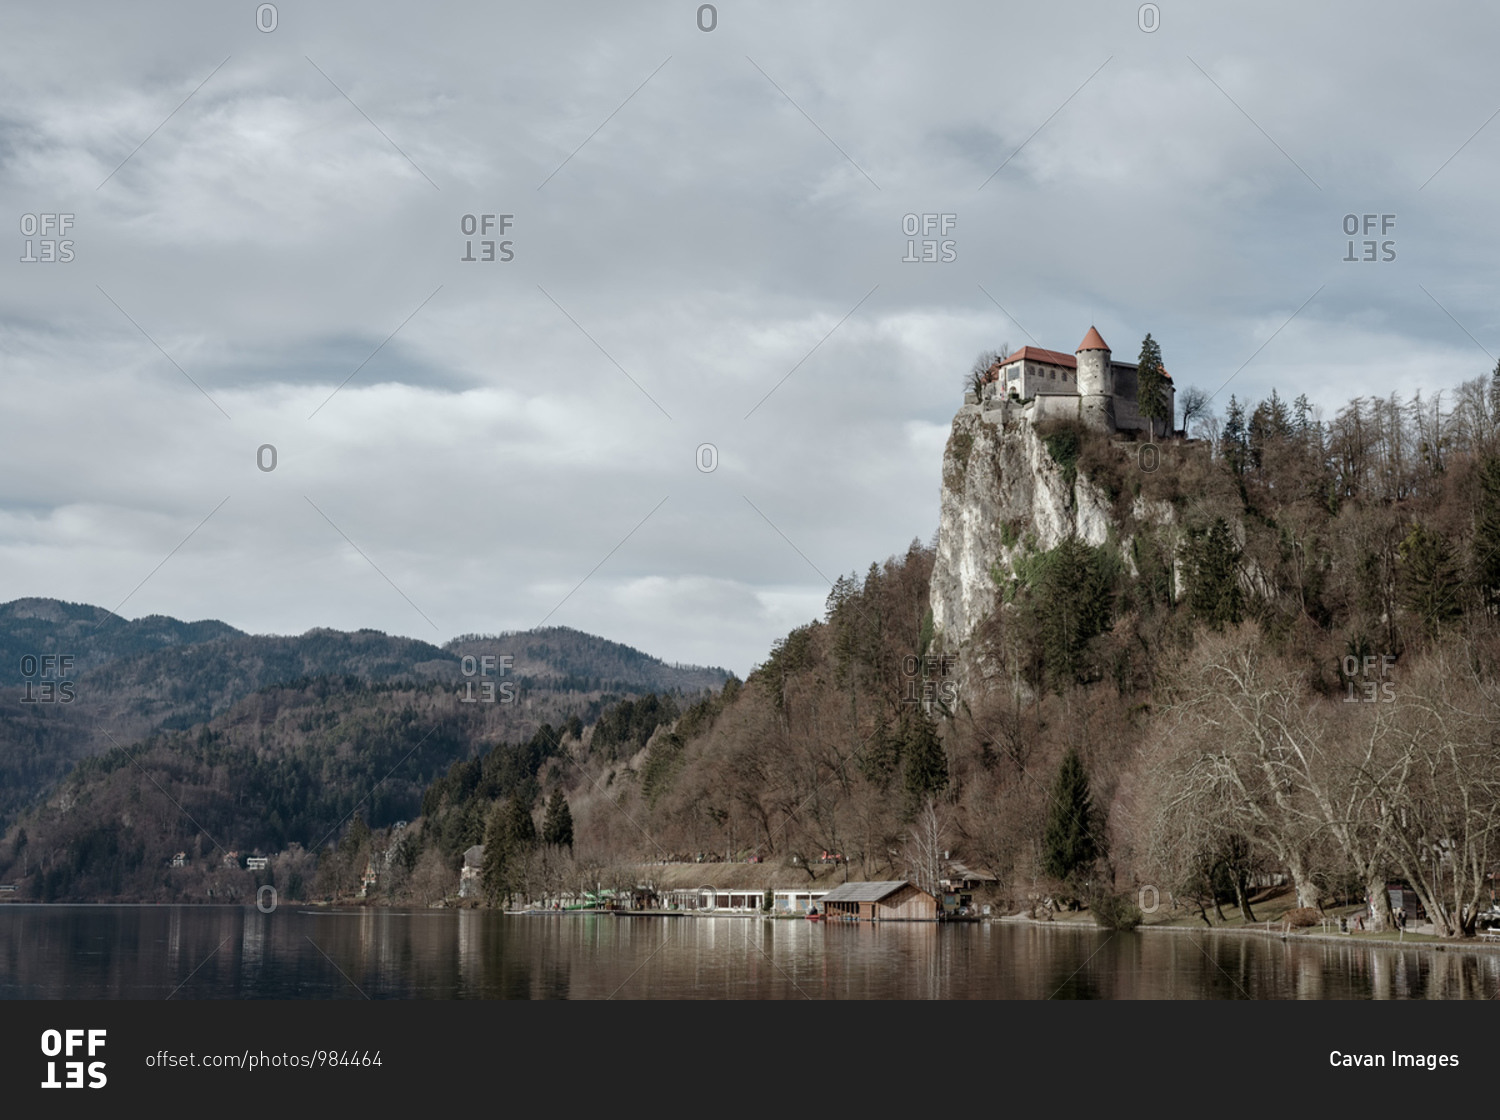 Bled castle on top of steep cliff above lake Bled in Slovenia